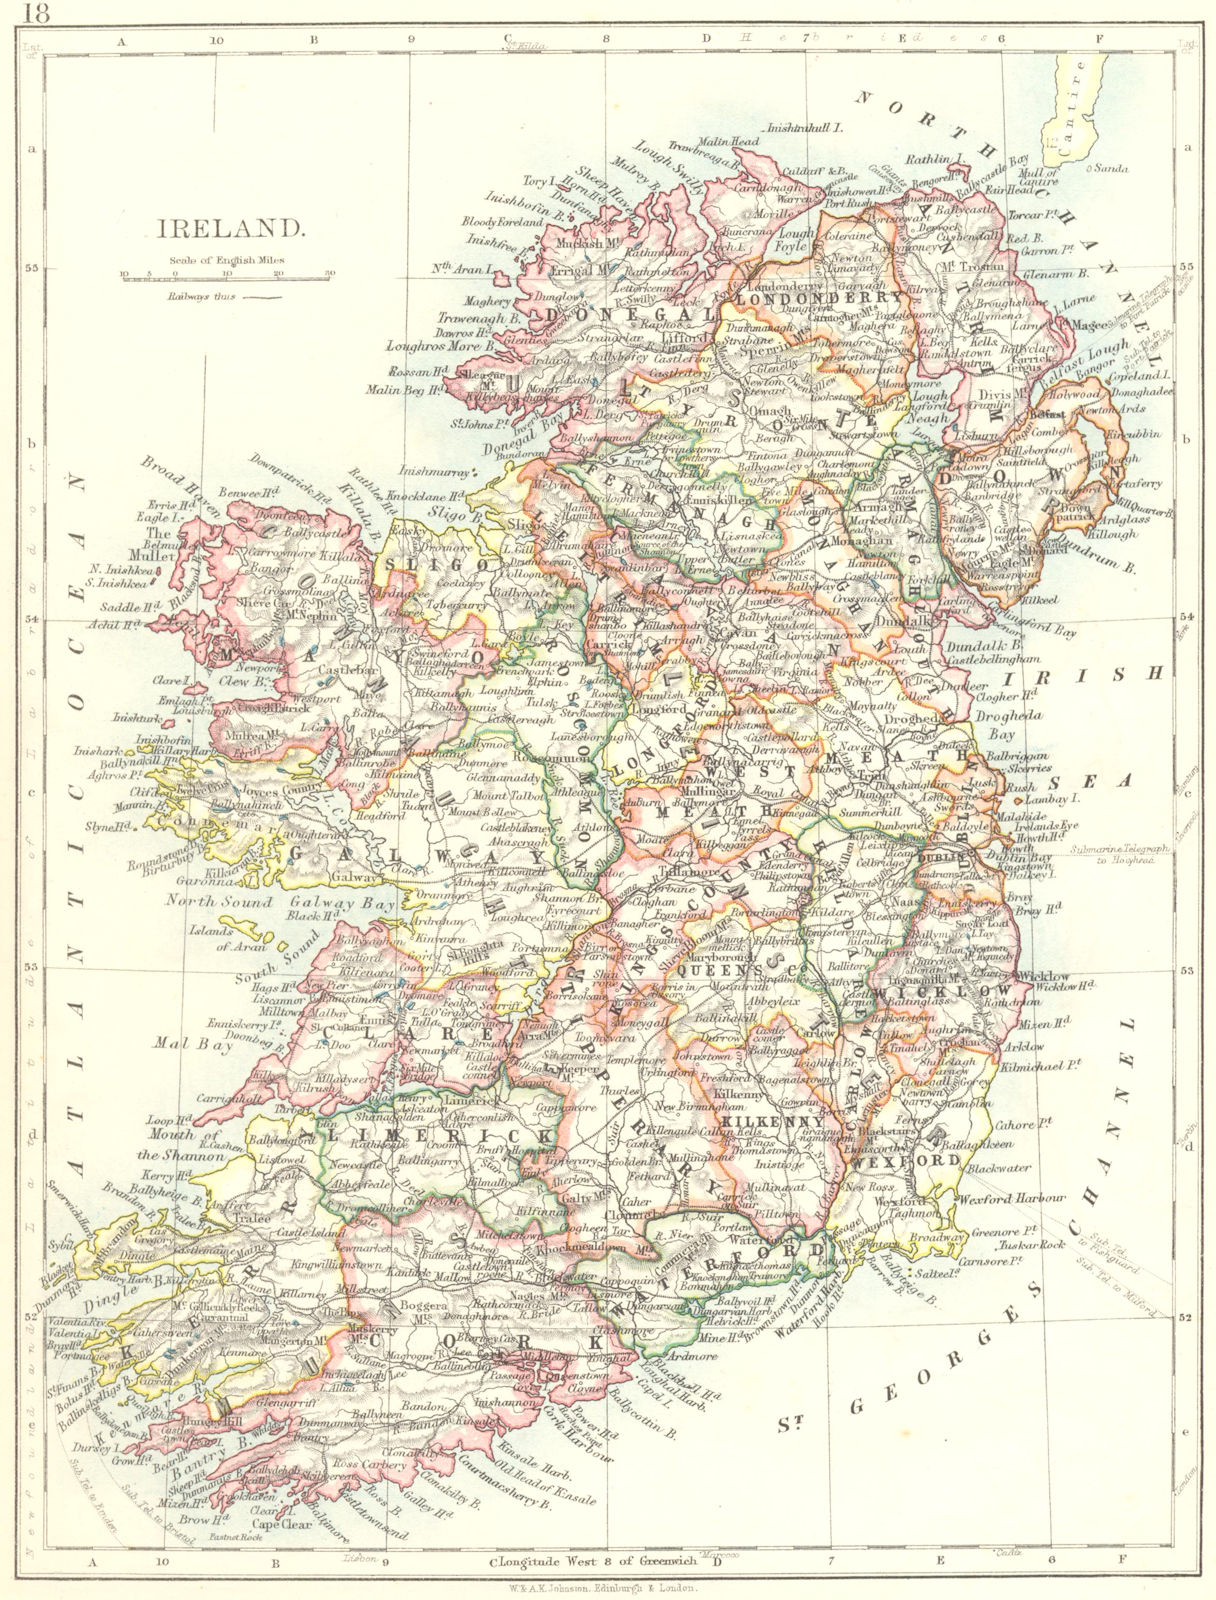 IRELAND. Showing counties. Undersea telegraph cables. JOHNSTON 1899 old map